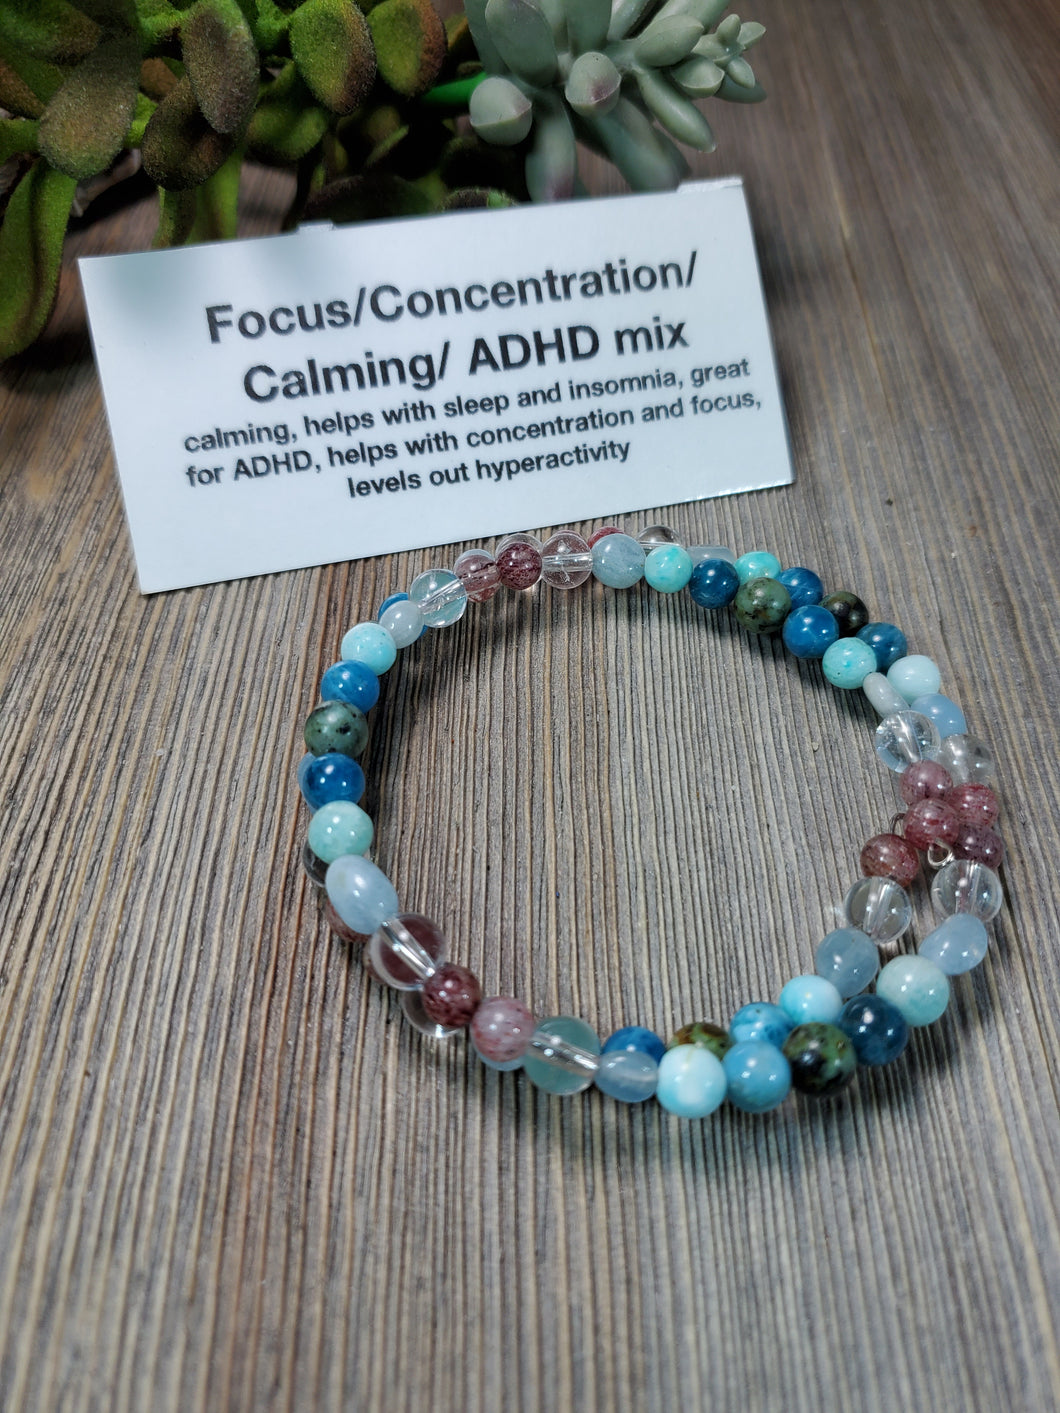 ADHD, Focus and Concentration mix